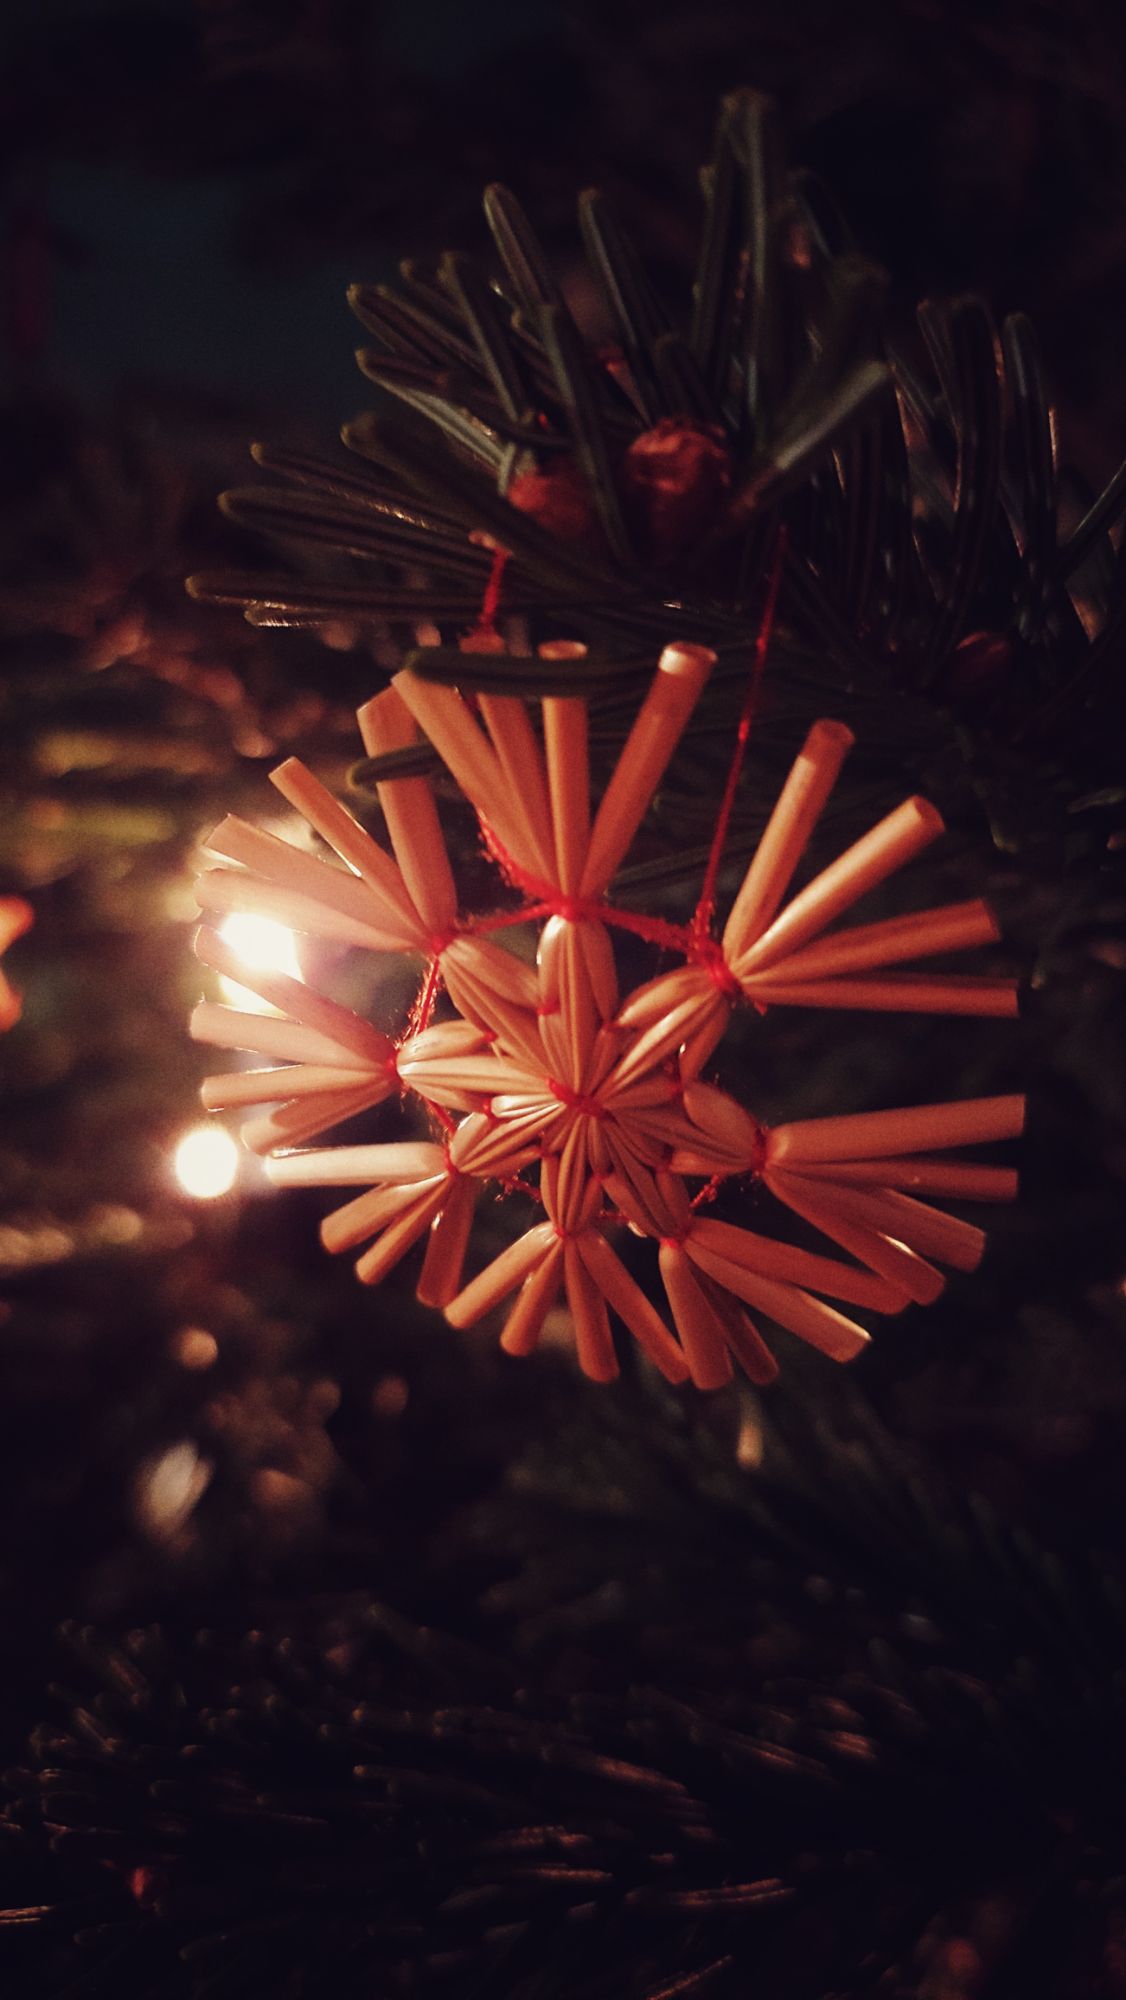 A star in a Christmas tree.